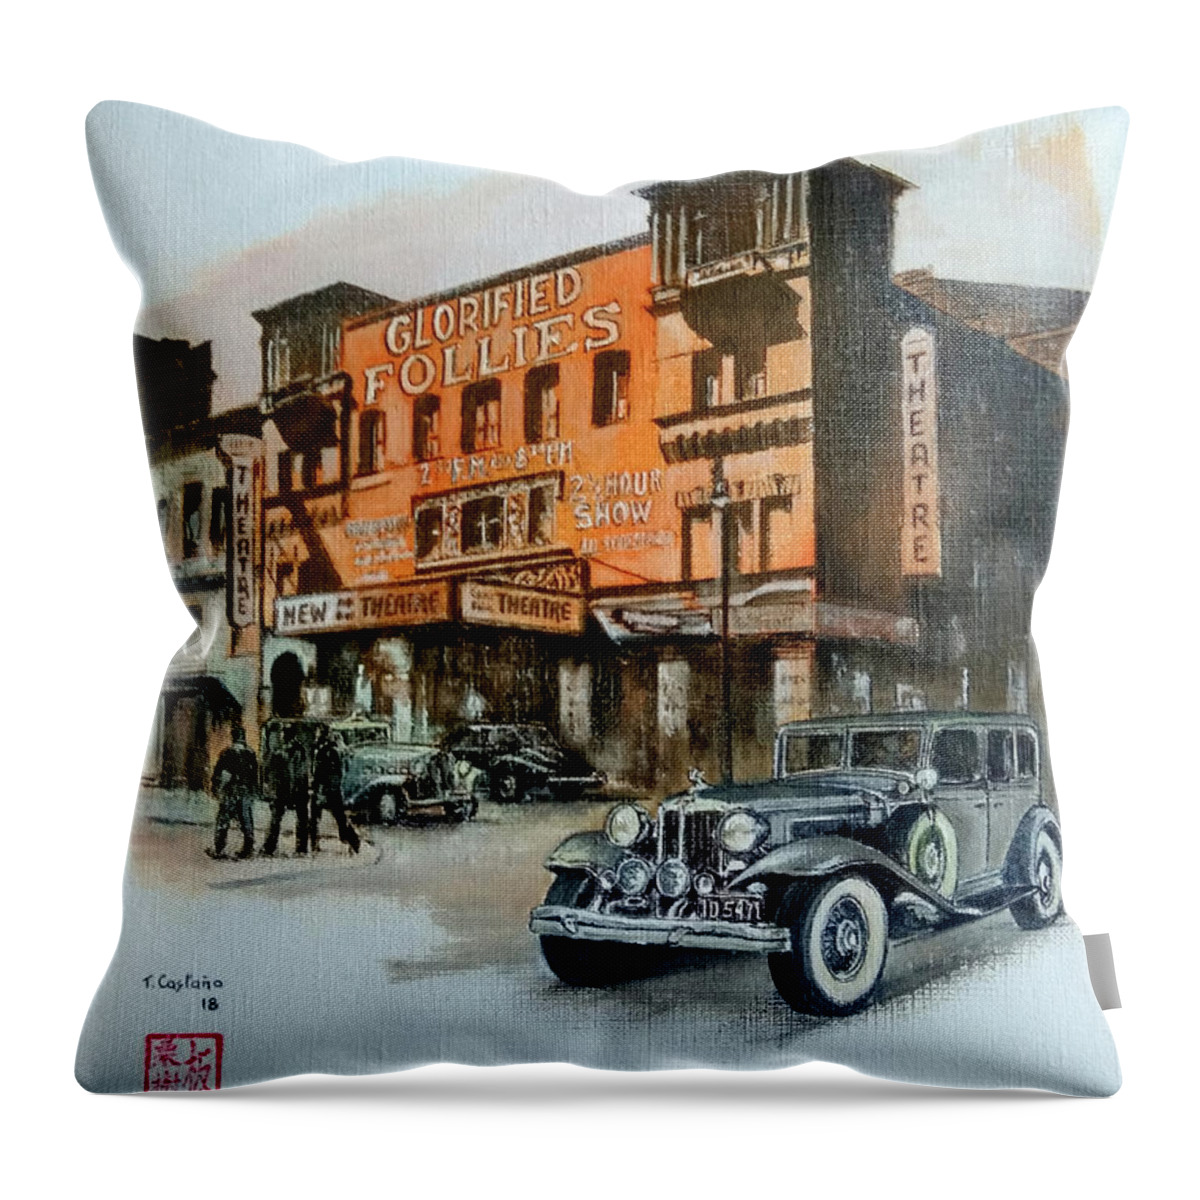 New Yor 1930 Throw Pillow featuring the painting New York 1930 - Irving Place Theatre, Manhattan by Tomas Castano